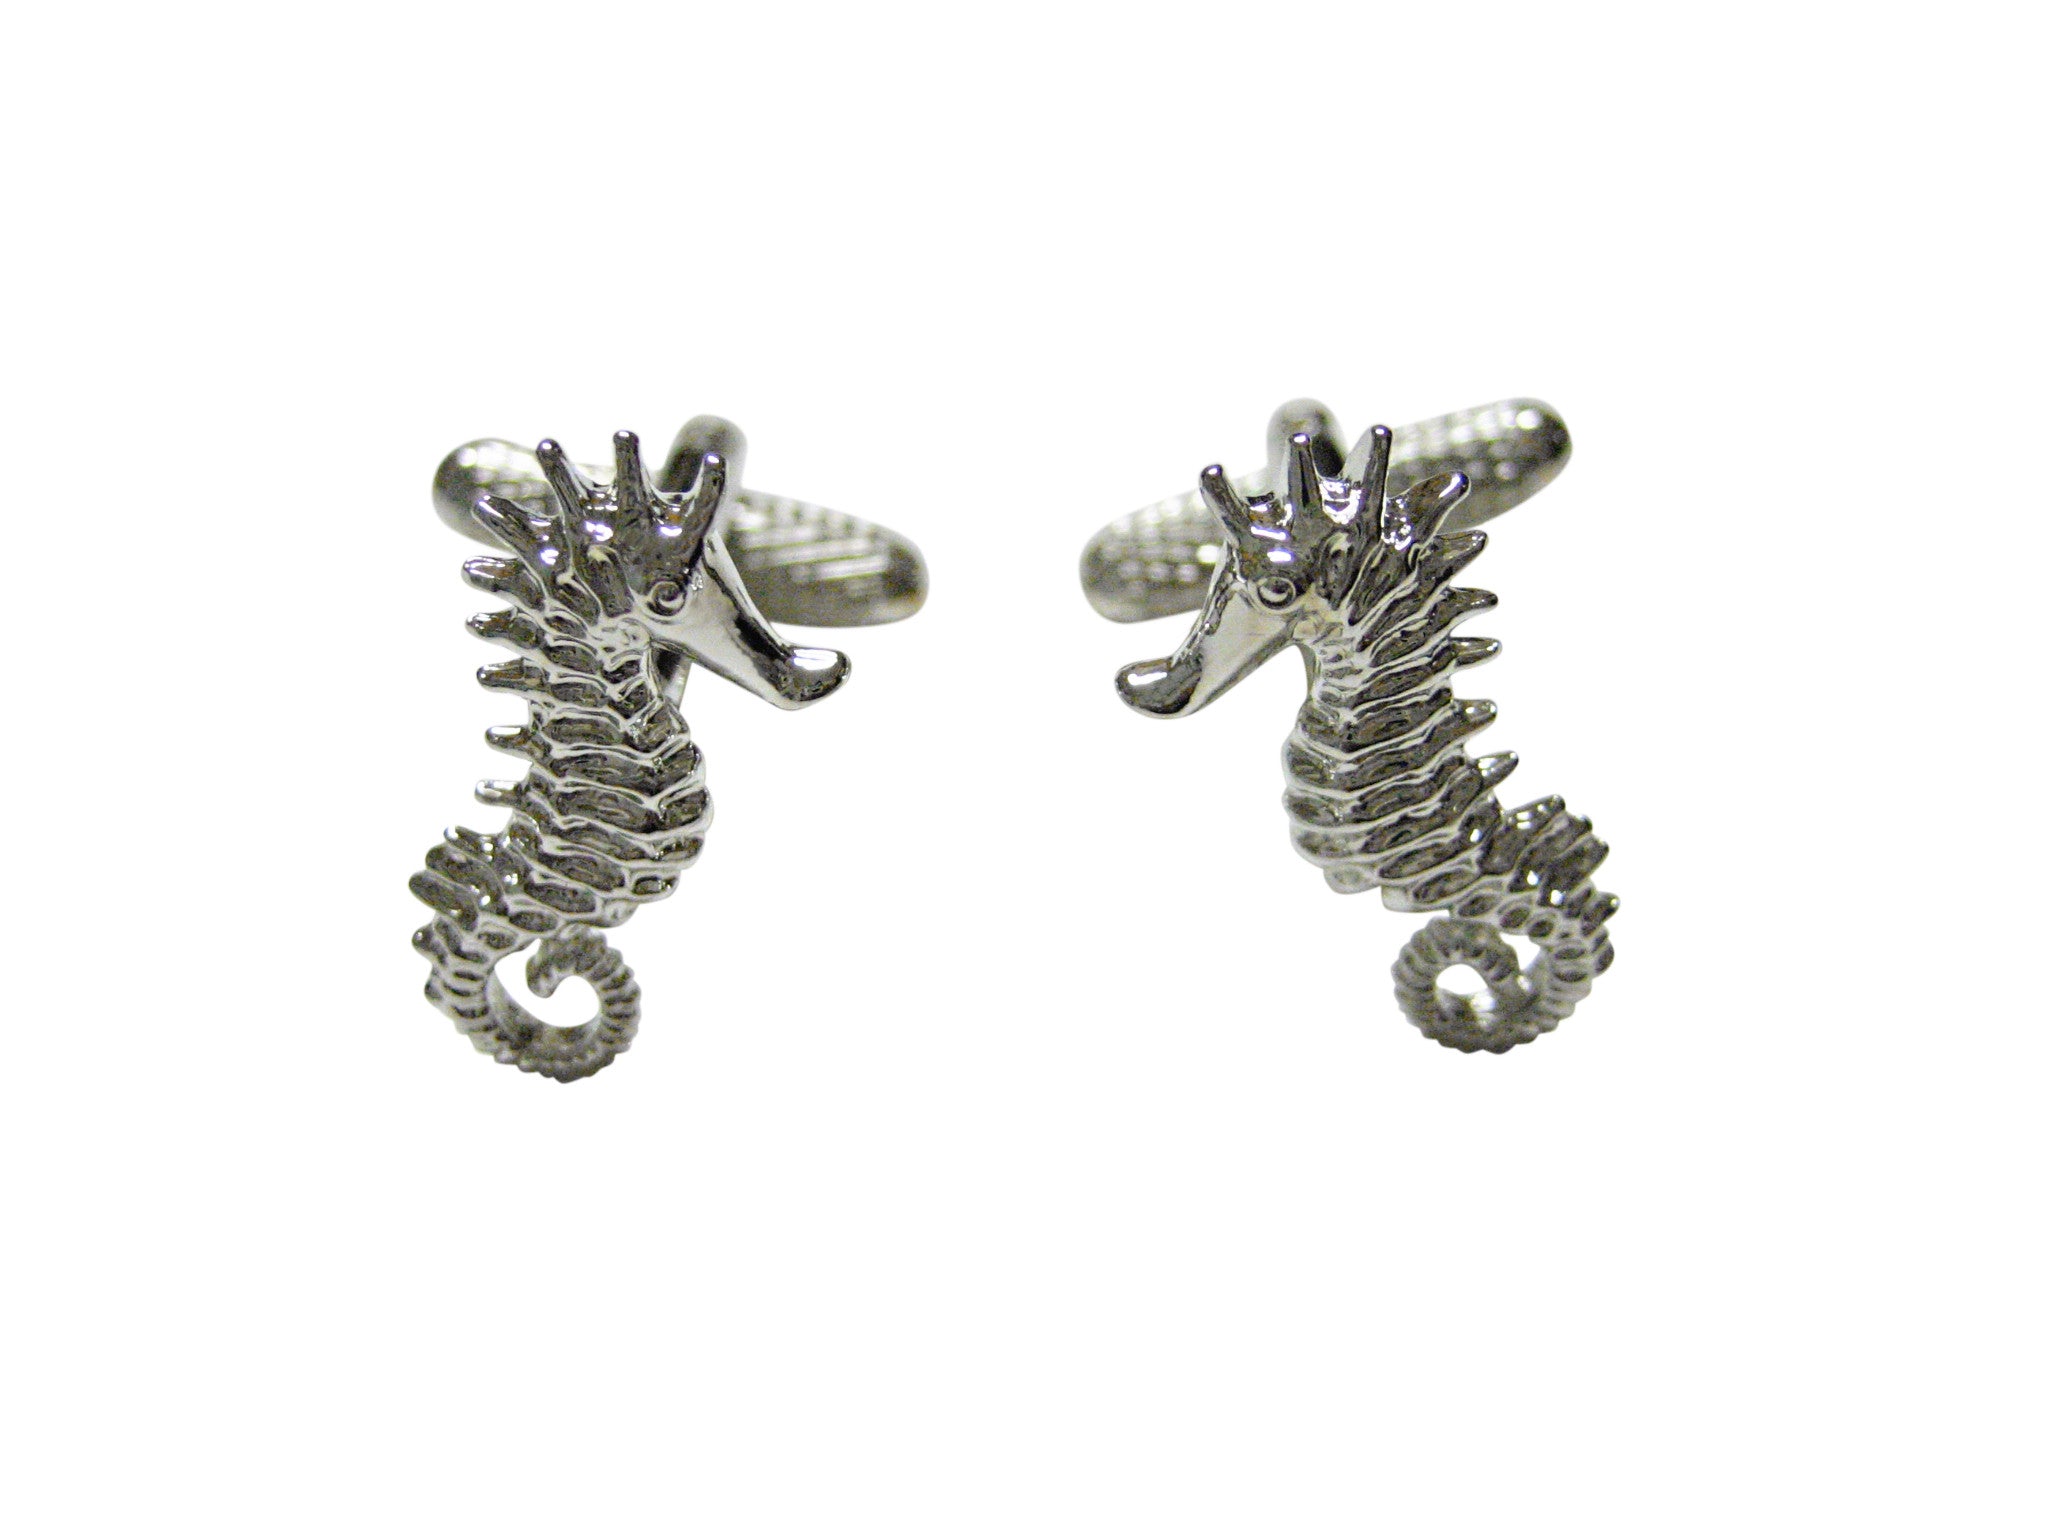 Silver Toned Detailed Sea Horse Cufflinks